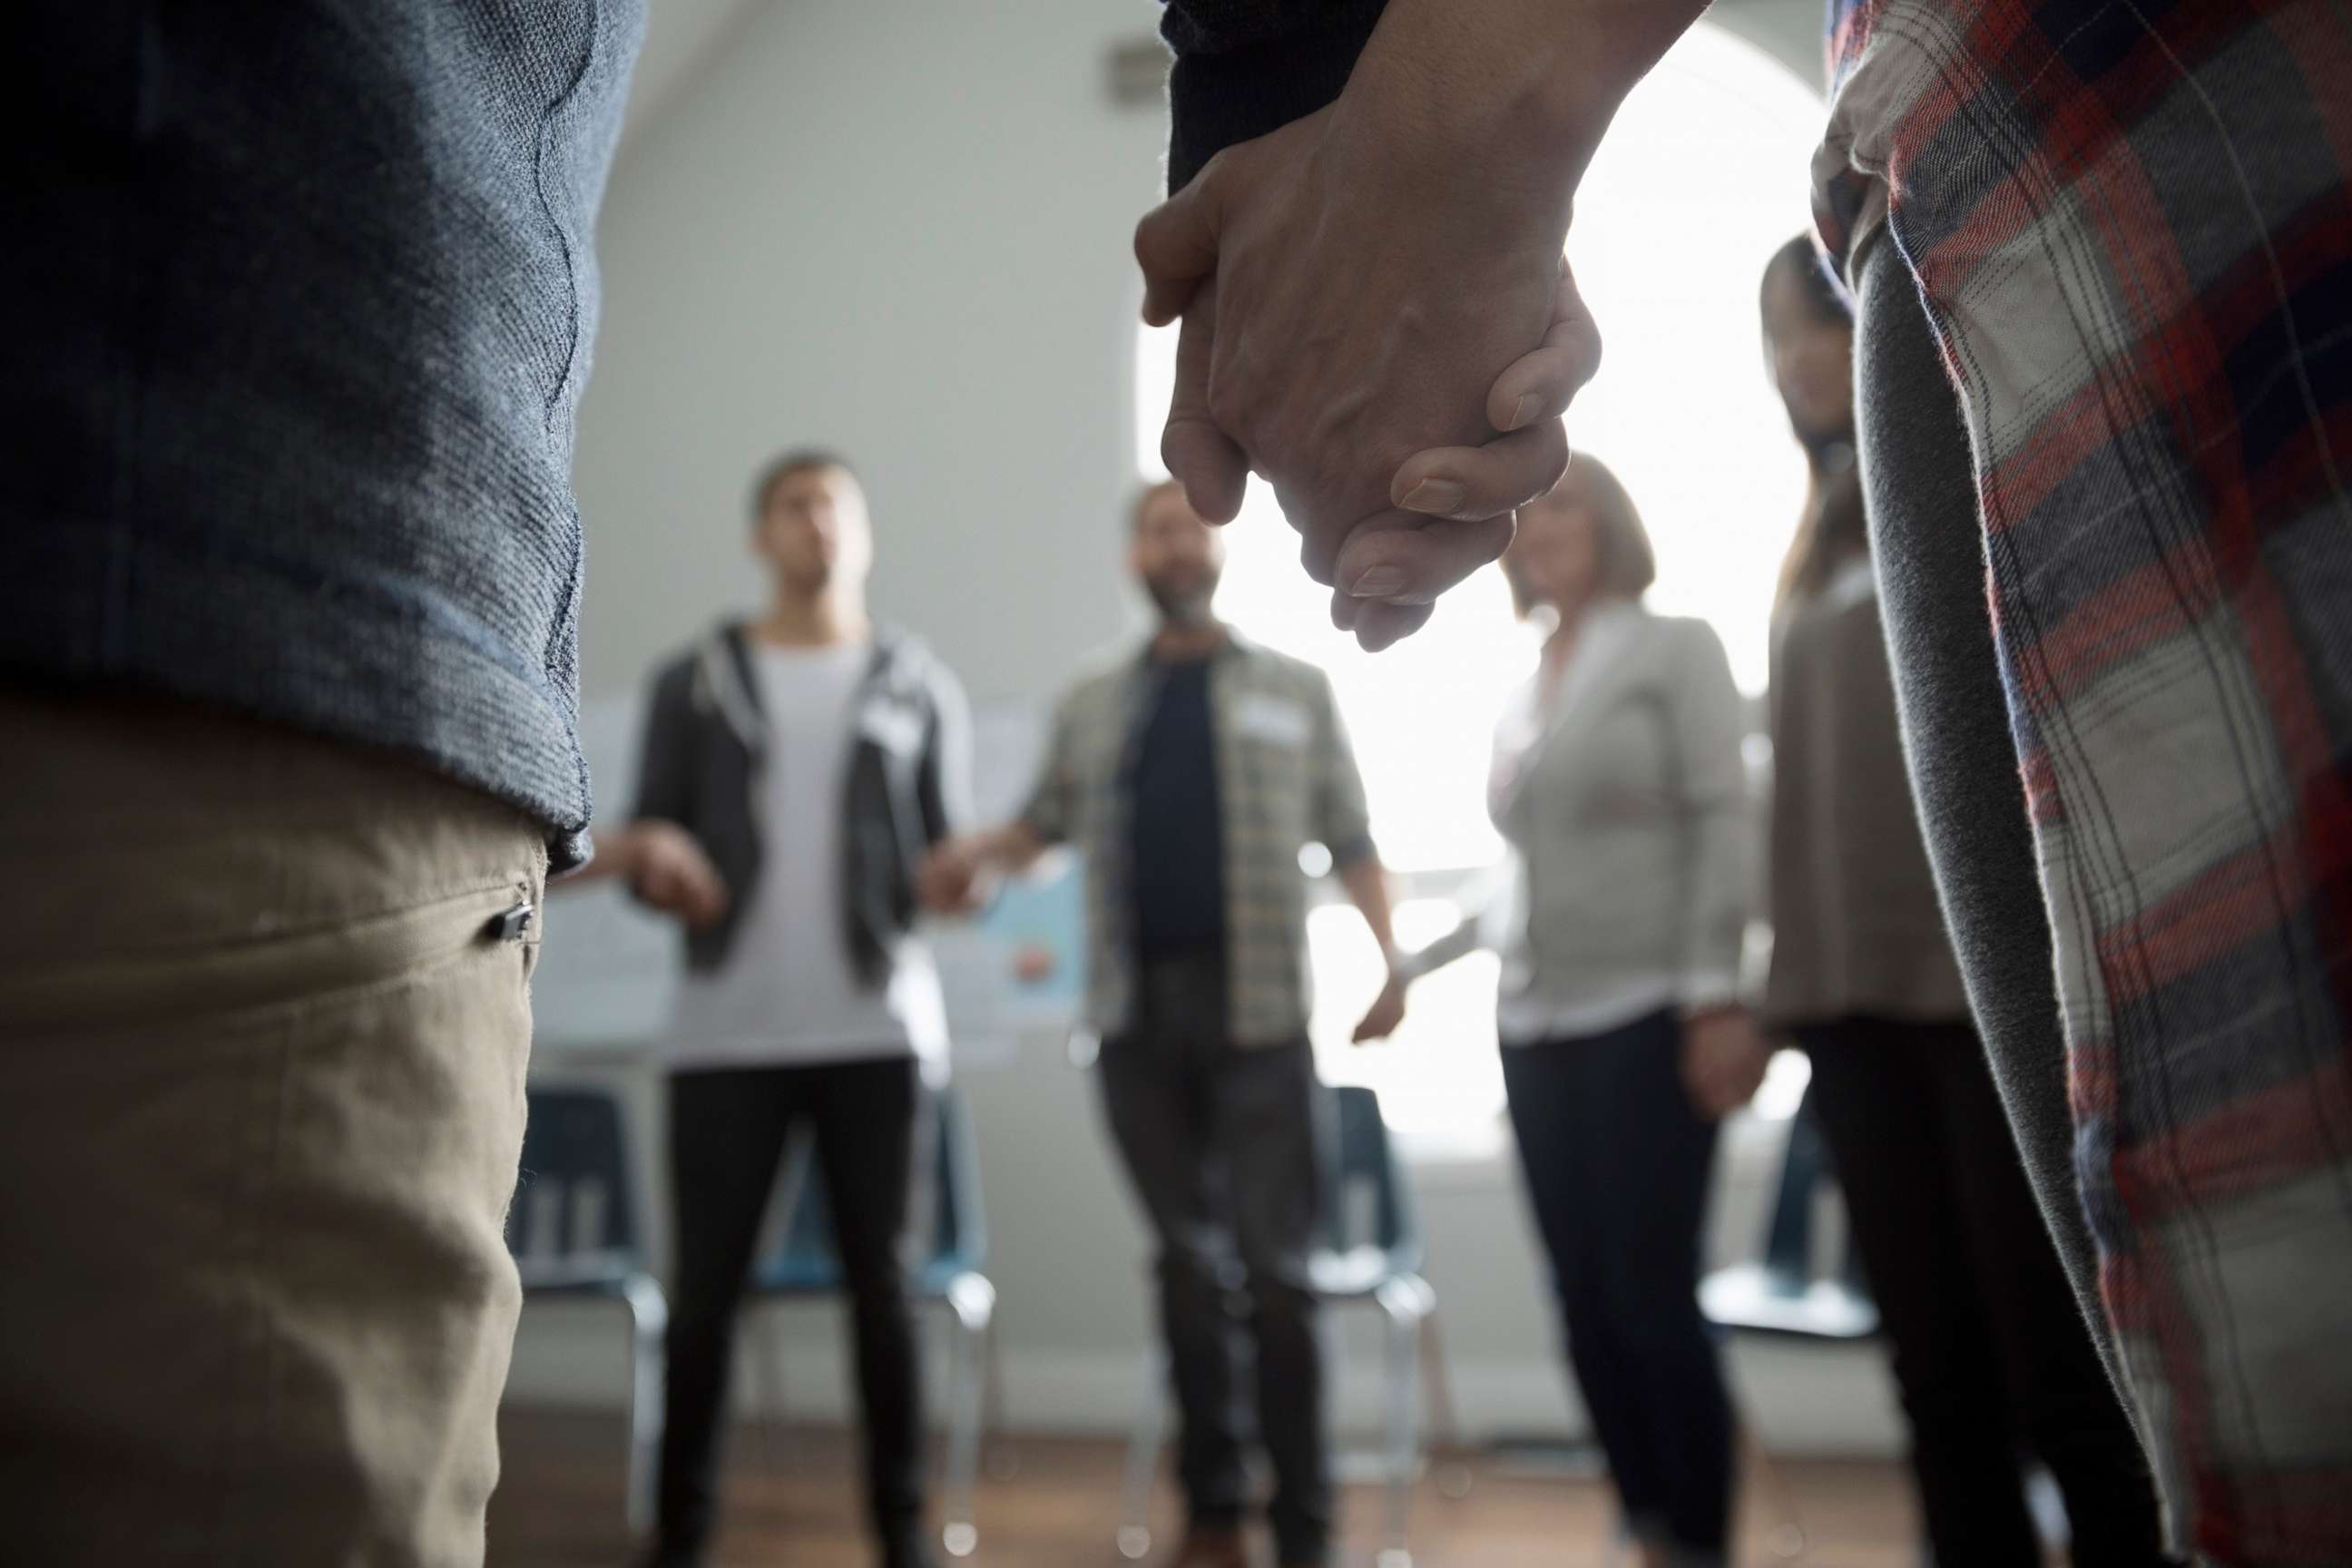 PHOTO: An undated stock photo shows a group of people holding hands in a circle.